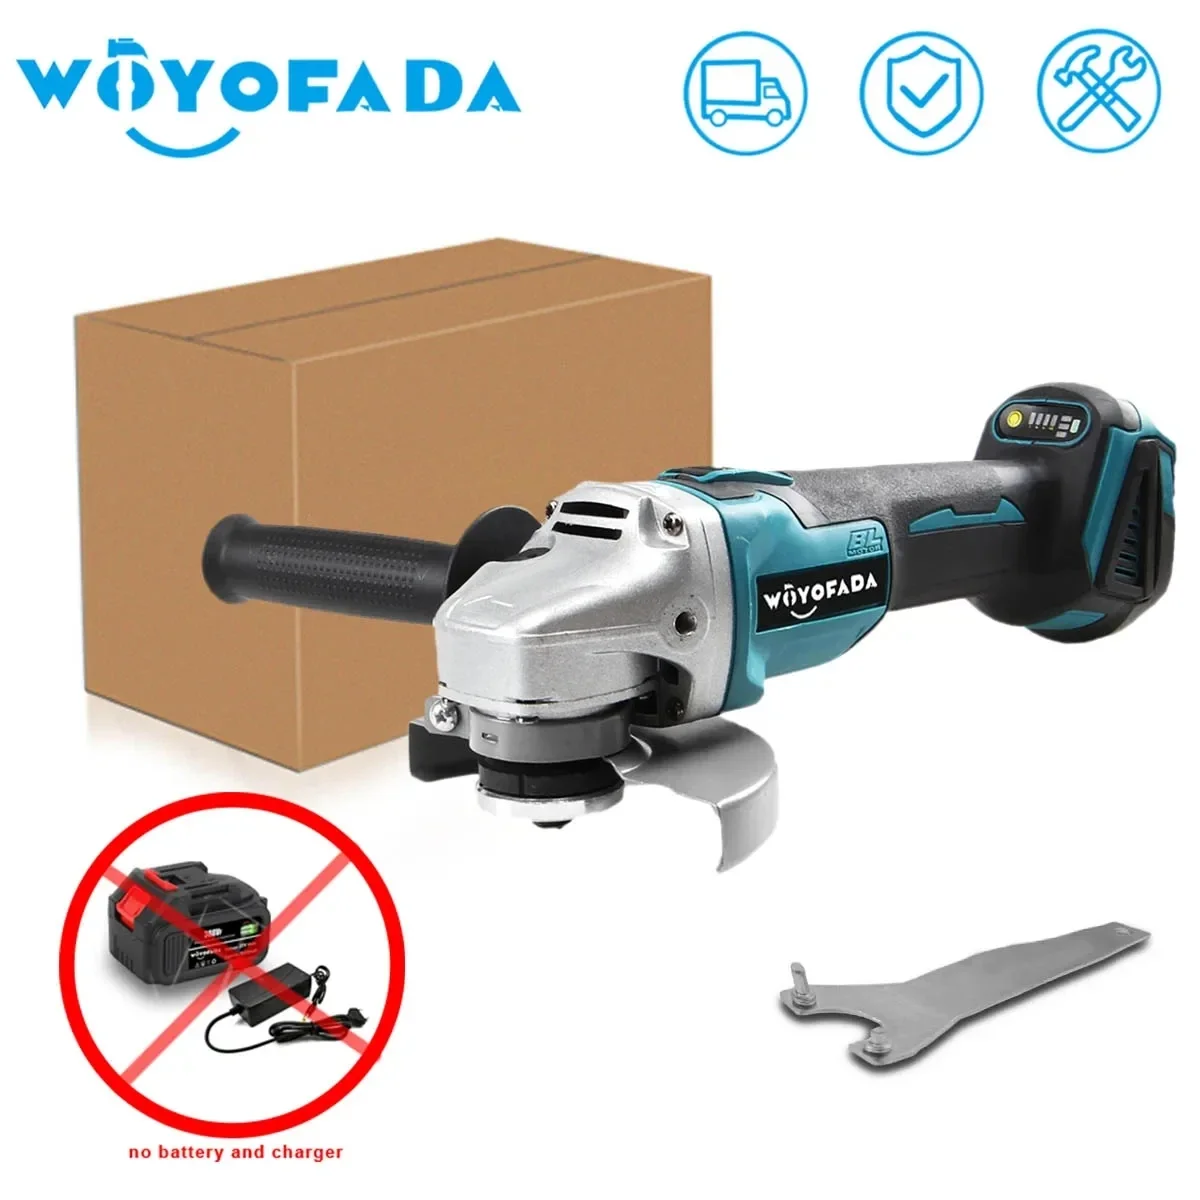 WOYOFADA 125/100mm Brushless Electric Angle Grinder Grinding Machine DIY Woodworking Power Tool Adapt For Makita 18V Battery